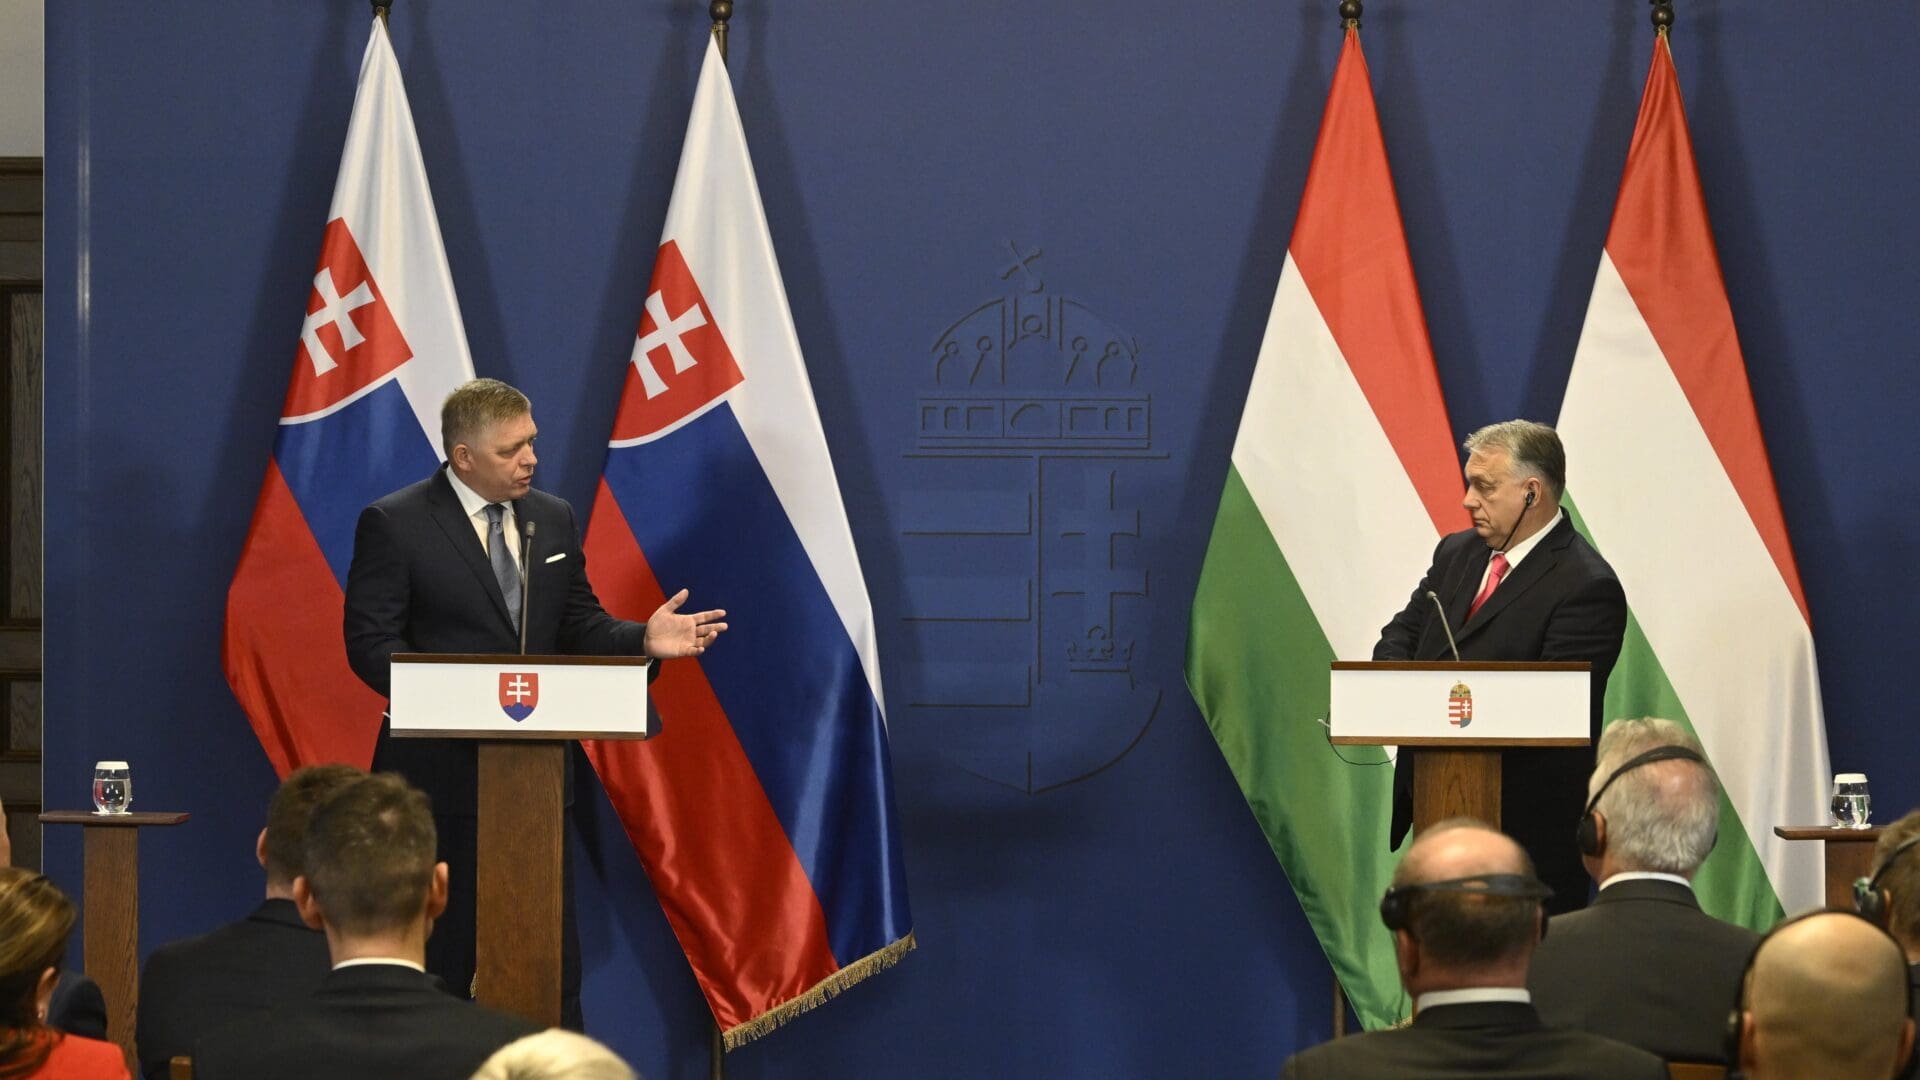 Robert Fico and Viktor Orbán’s joint press conference at the Carmelite Monastery in Budapest on 16 January 2024.